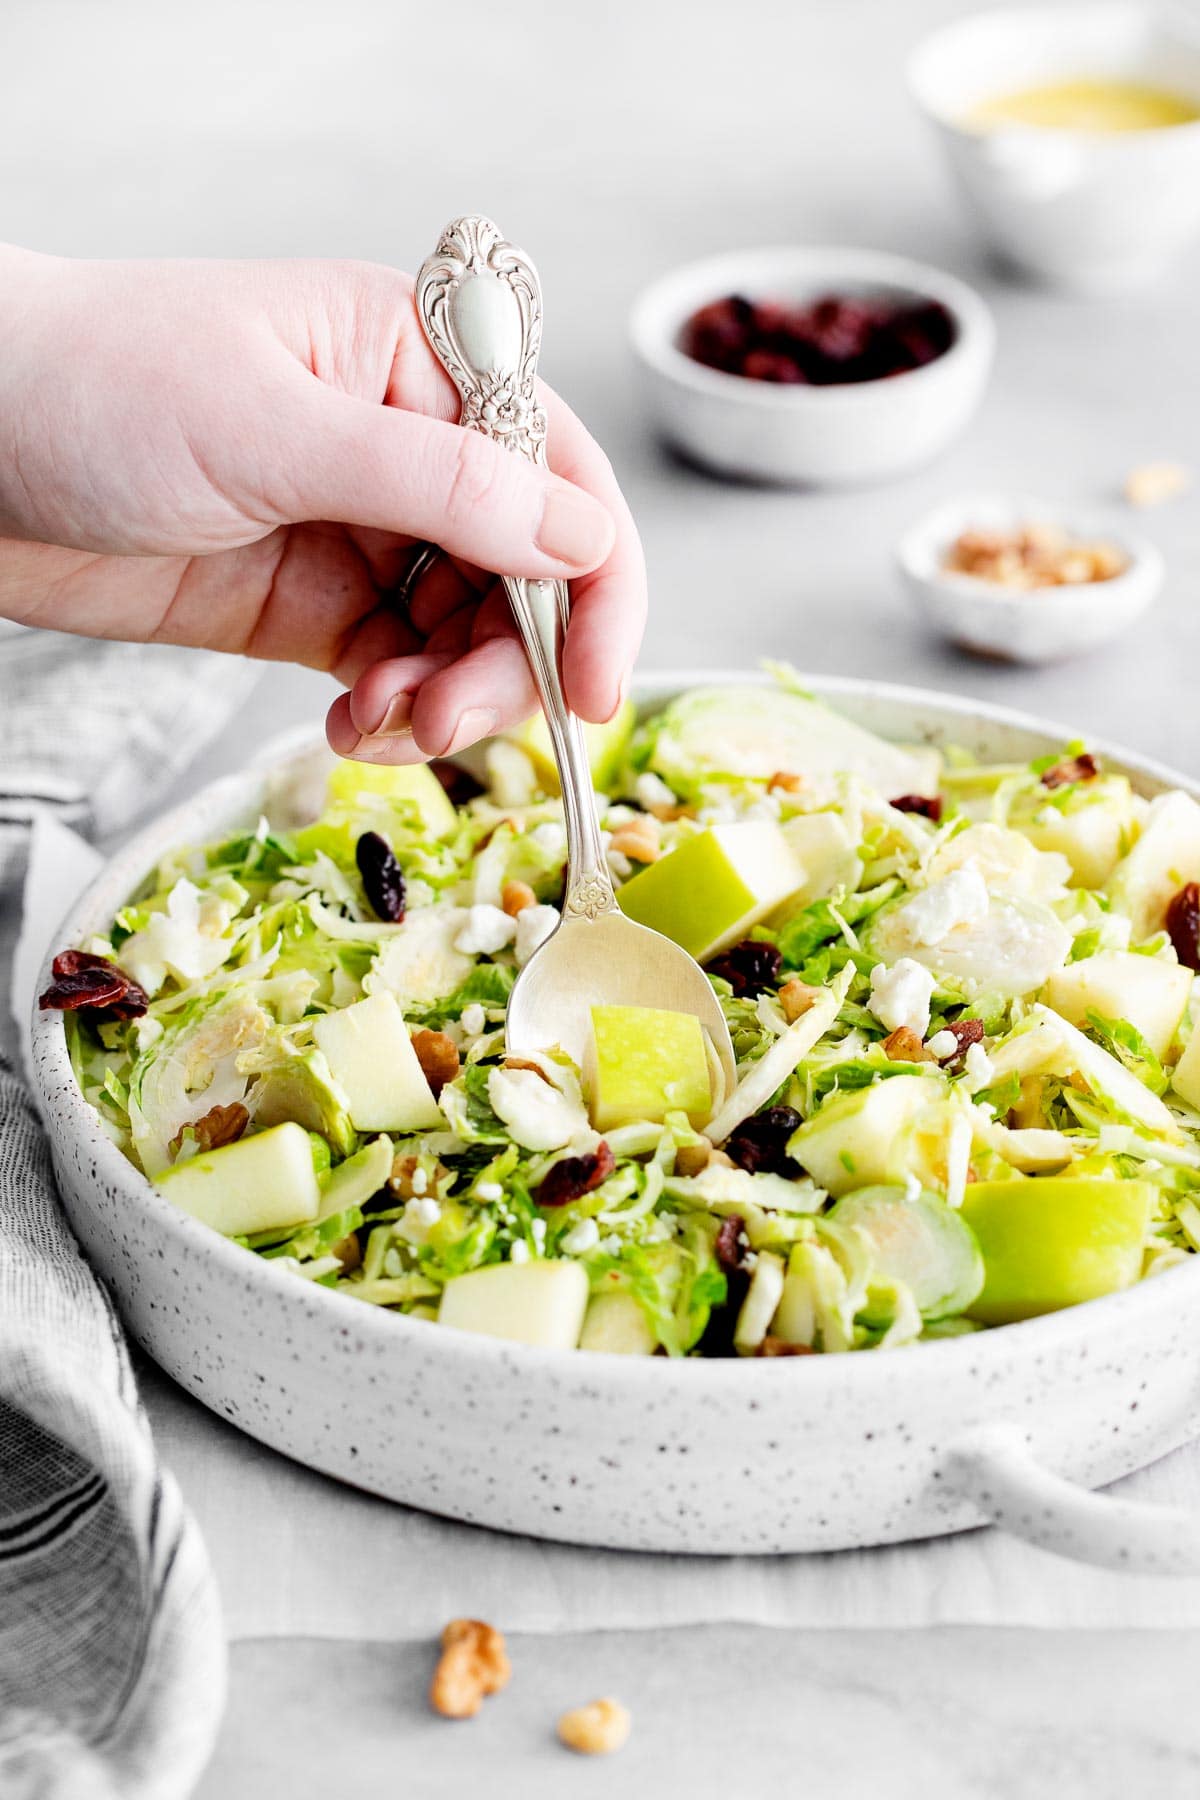 silver spoon scooping brussel sprout salad with chopped green apple out of a white serving bowl.